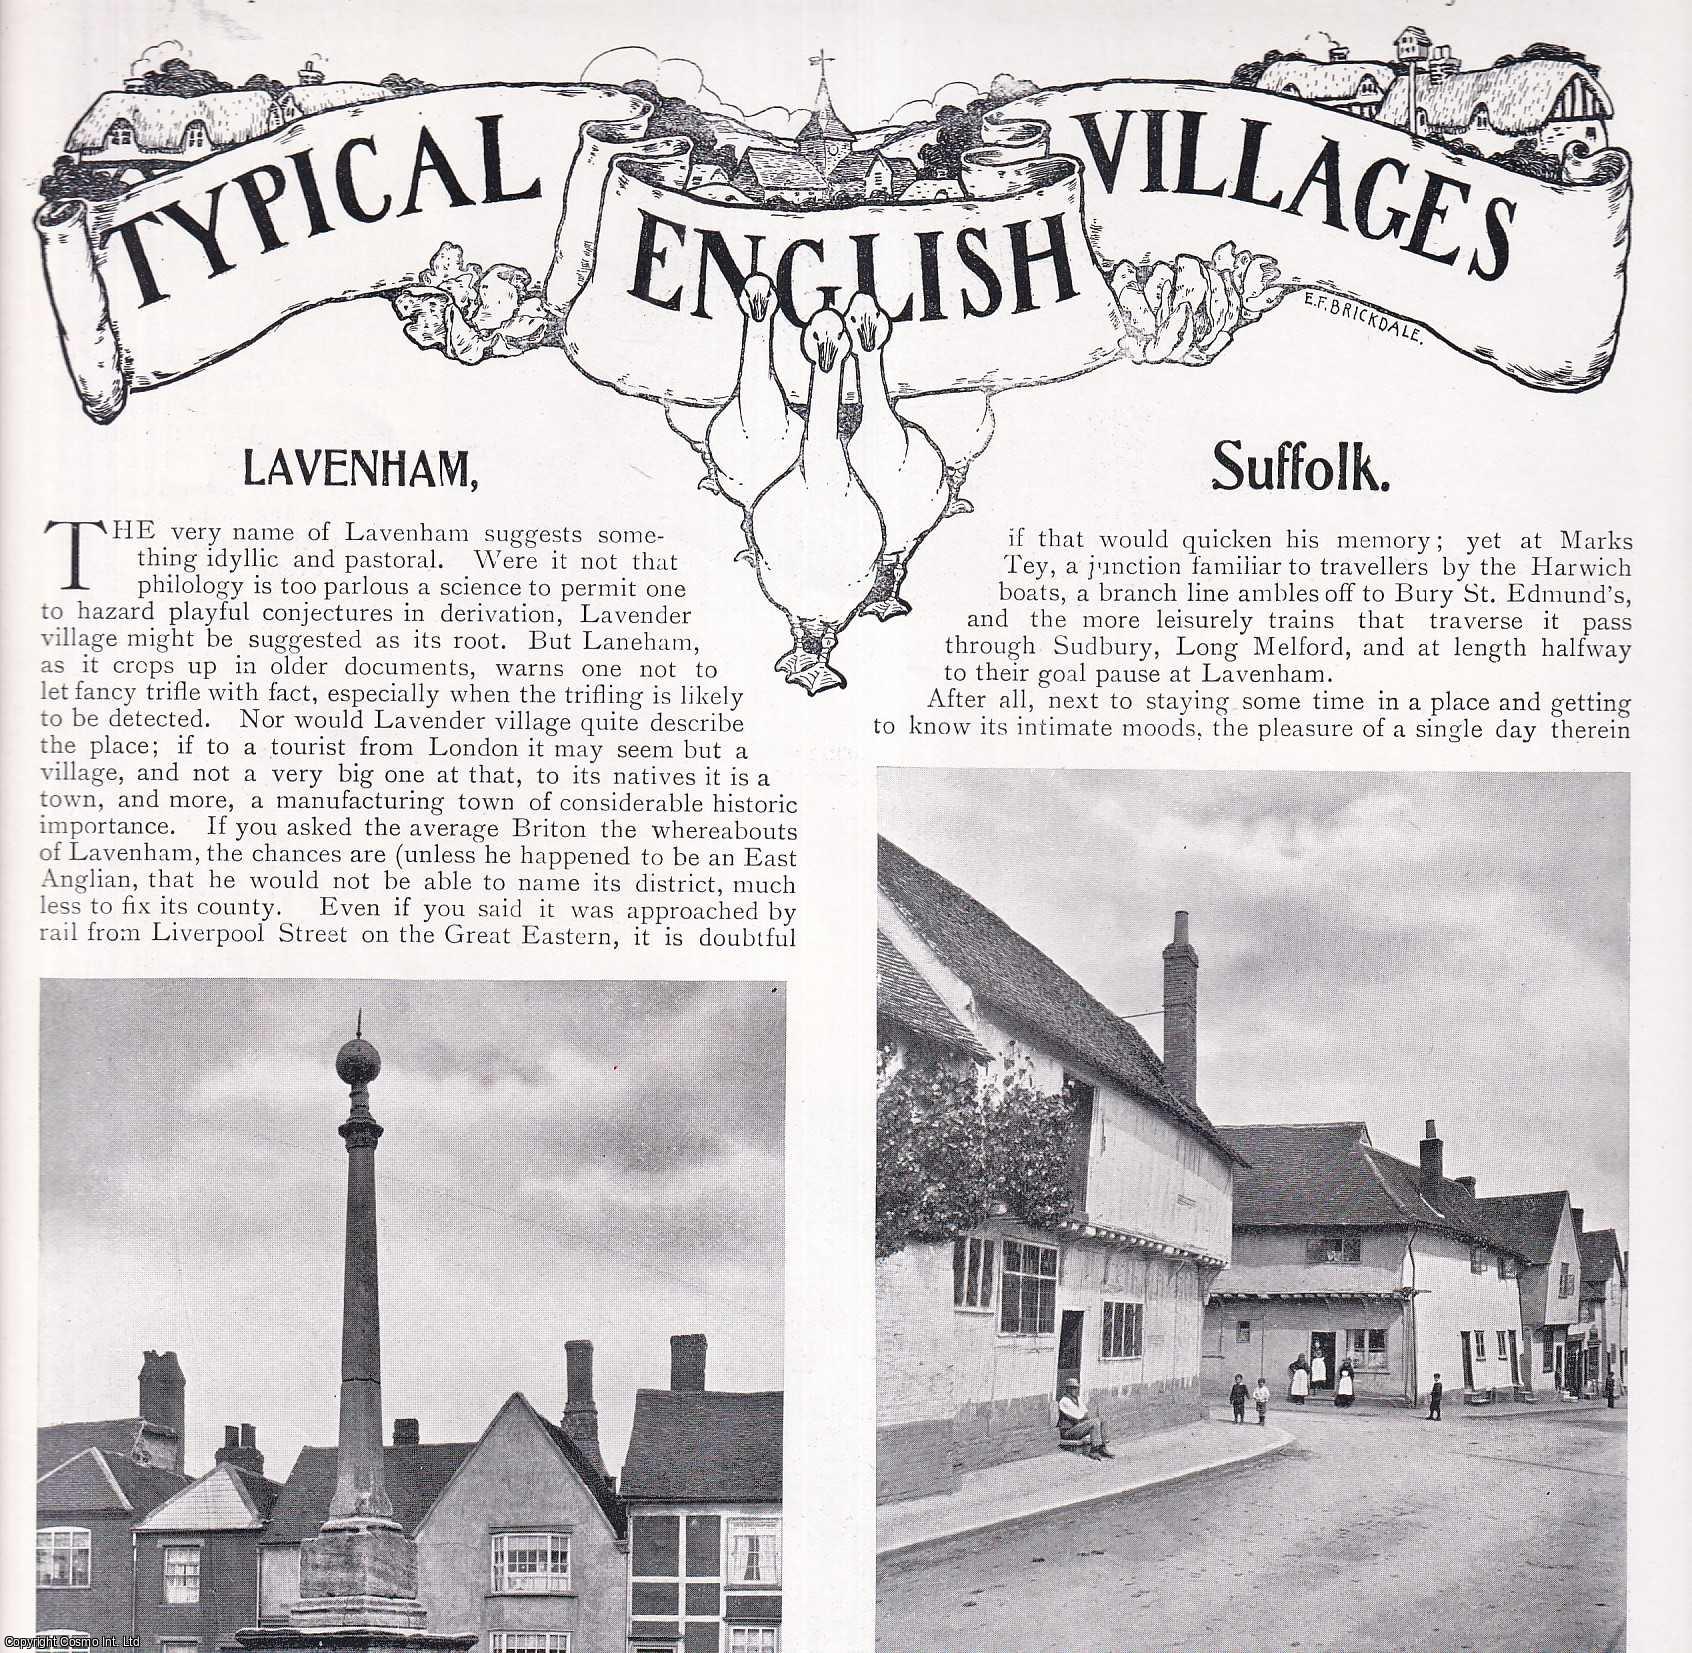 COUNTRY LIFE - Lavenham, Suffolk. Several pictures and accompanying text, removed from an original issue of Country Life Magazine, 1898.